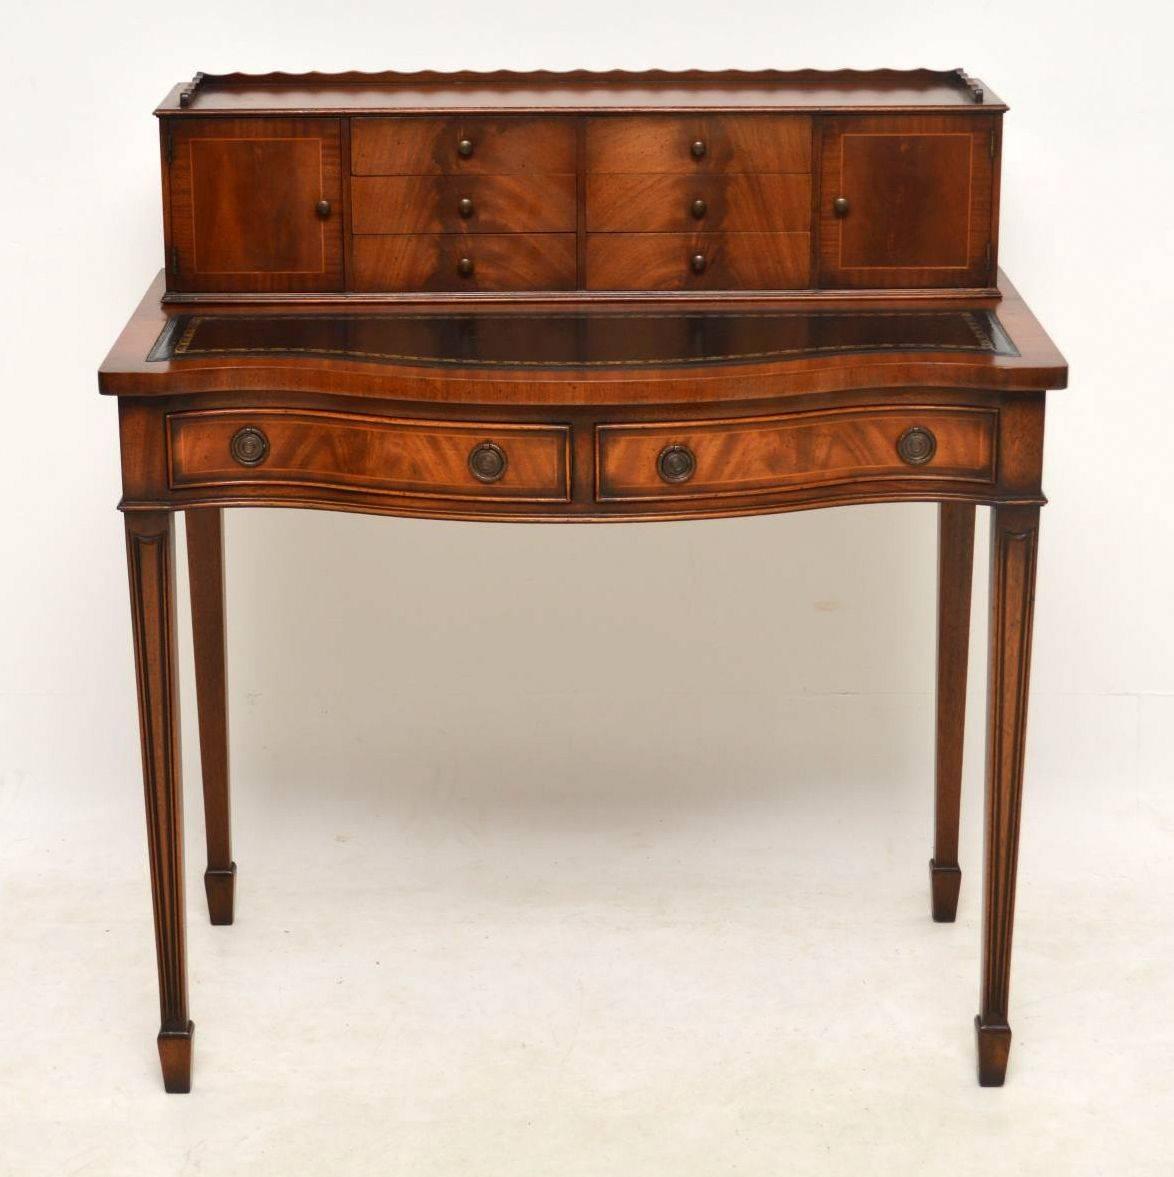 Very elegant antique Sheraton style writing table with some fine features, in good condition and dating from circa 1950s period. There are two banks of drawers and two cupboards with a shaped gallery above the tooled leather writing surface. Below